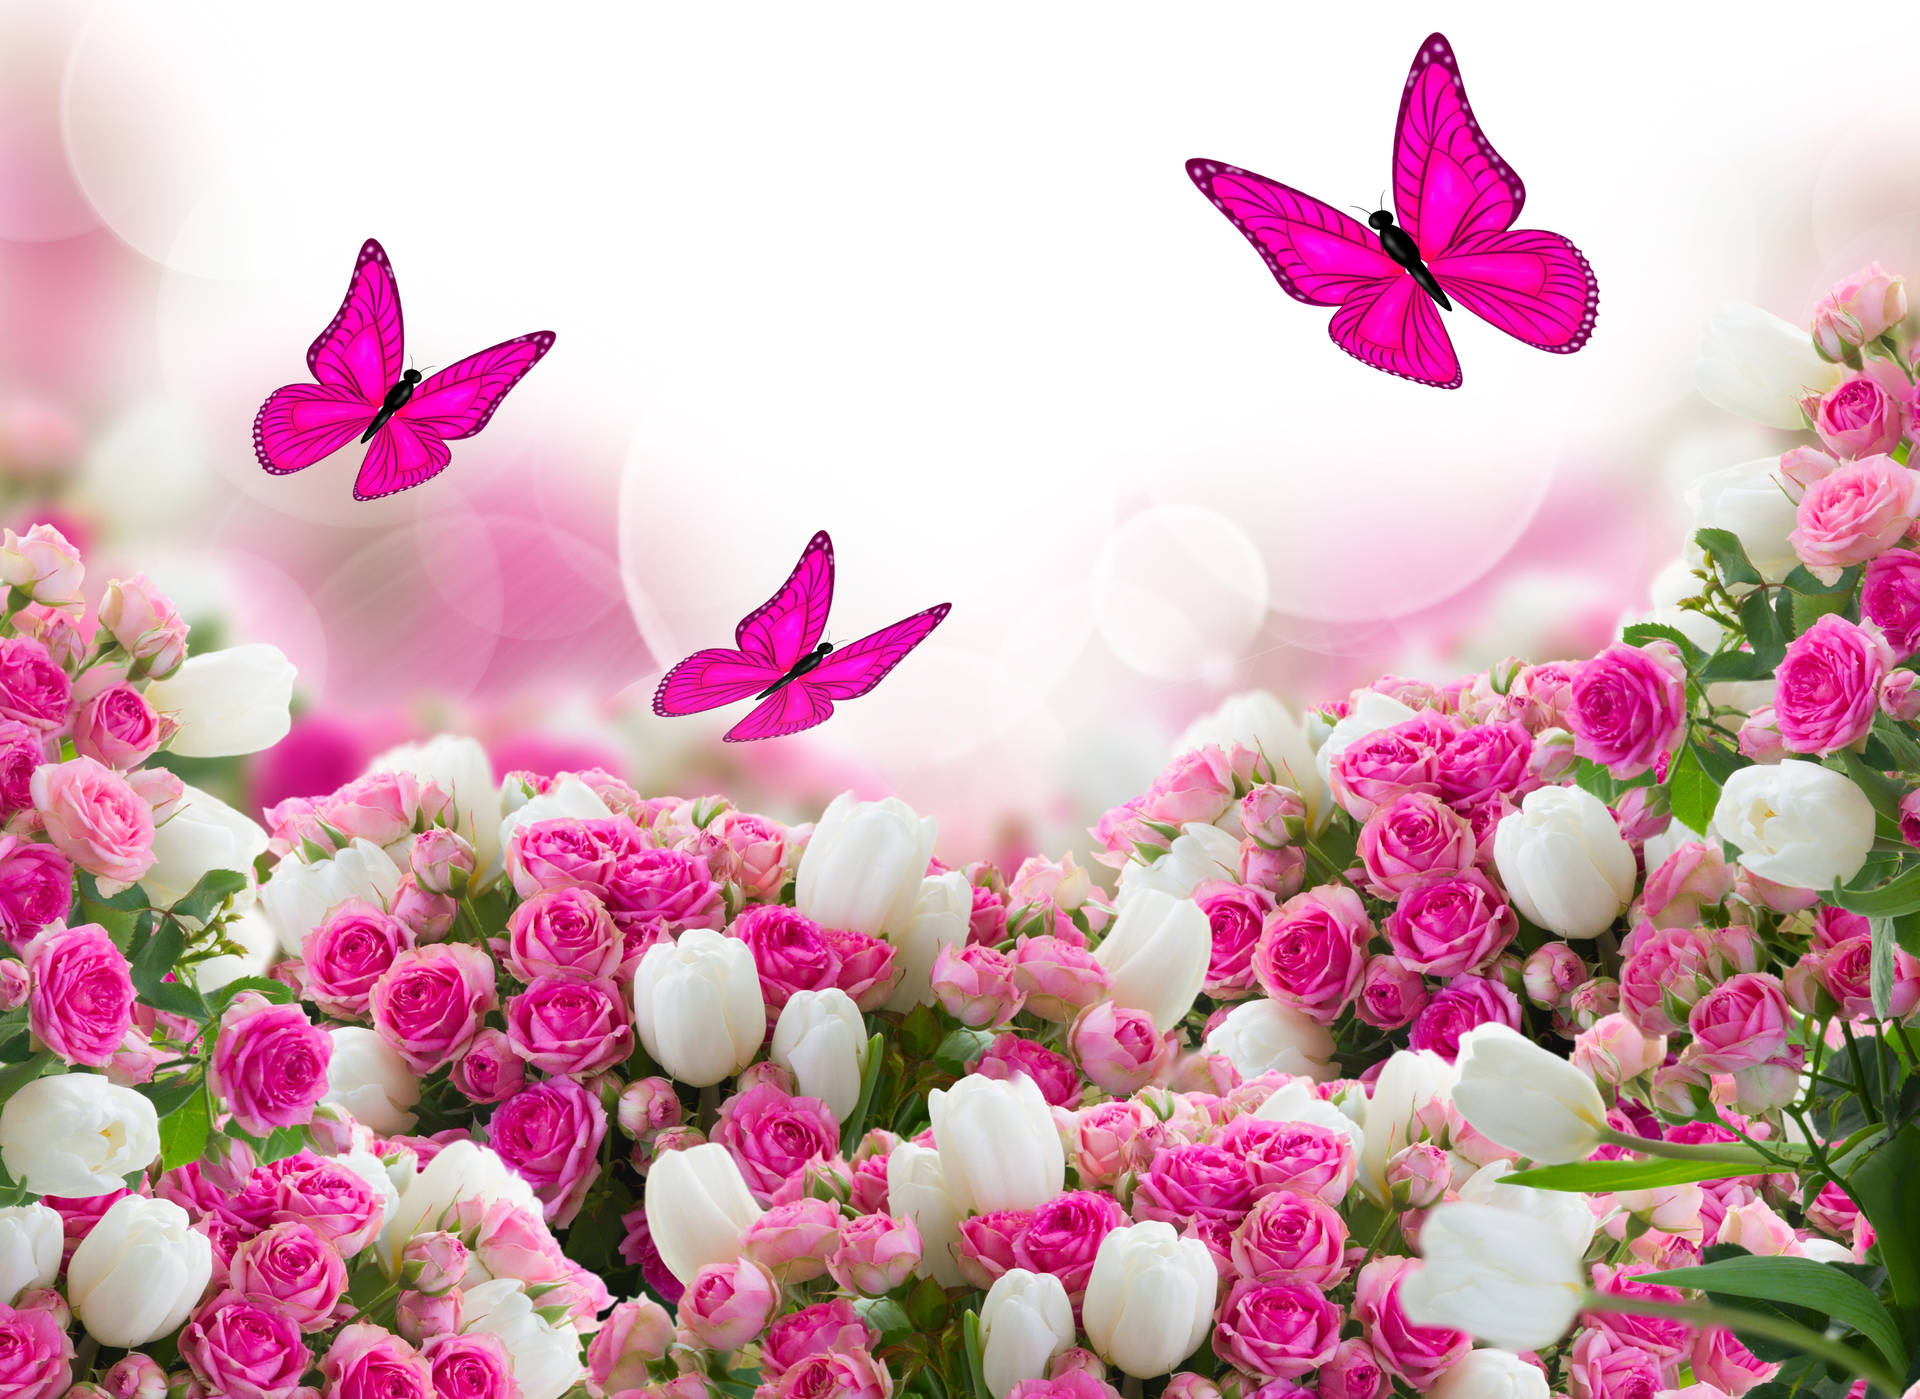 Cute Pink Butterfly Insects In Flower Field Background